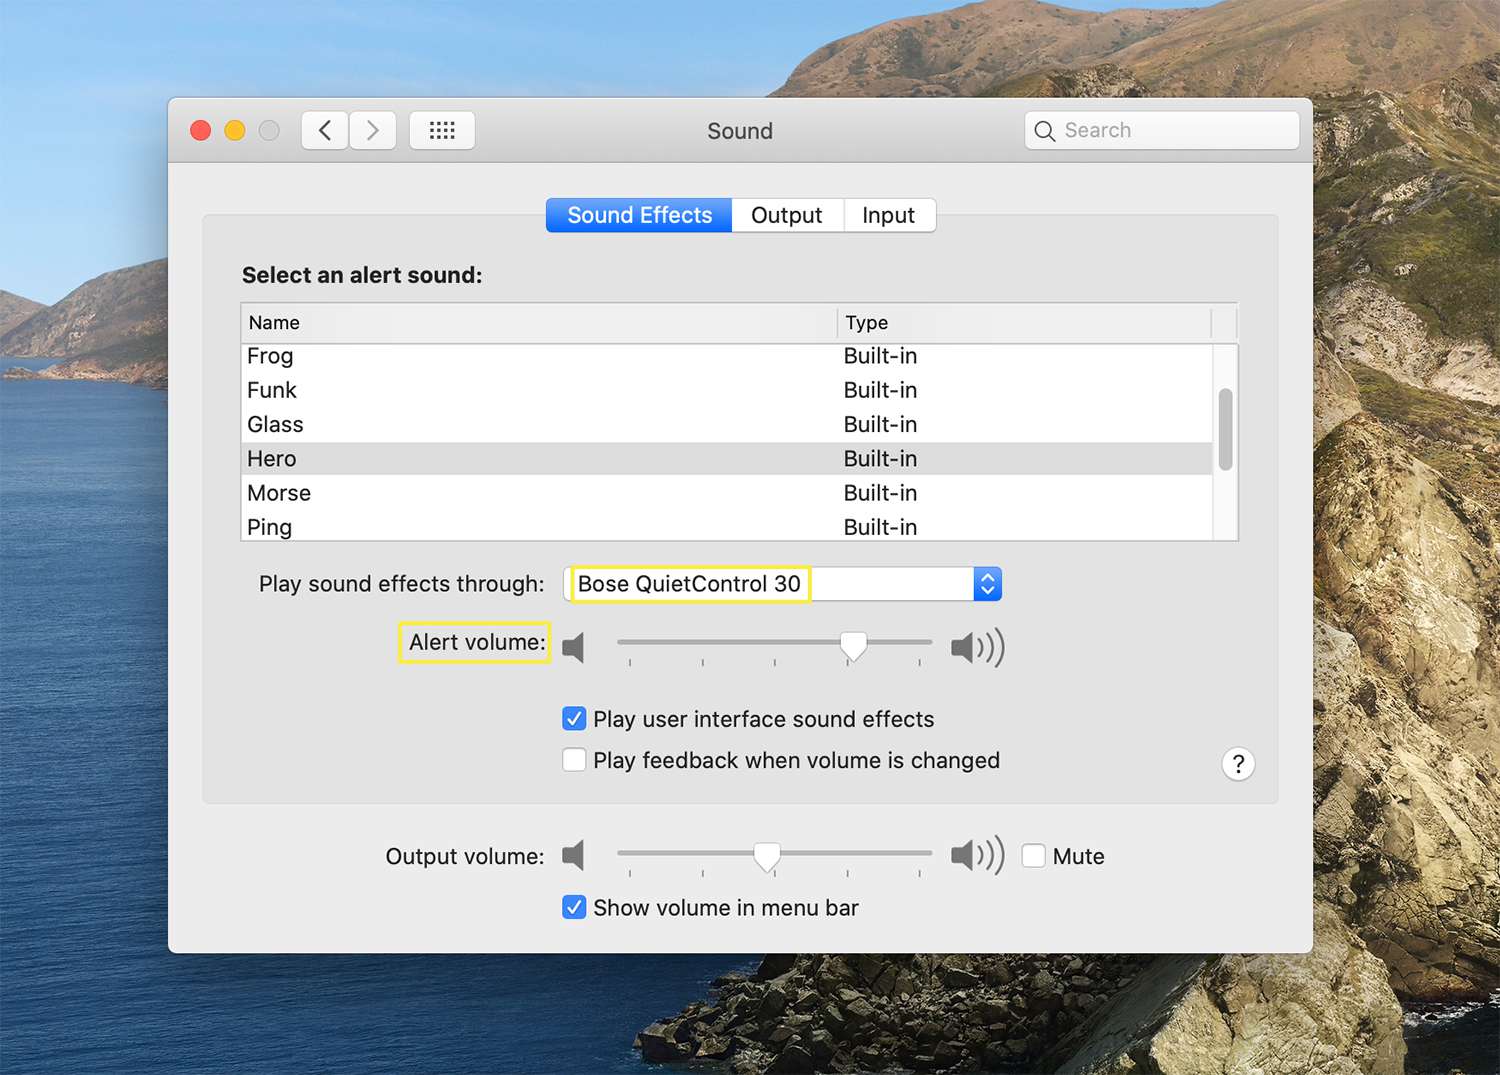 Sound Effects options from the Sound settings on macOS